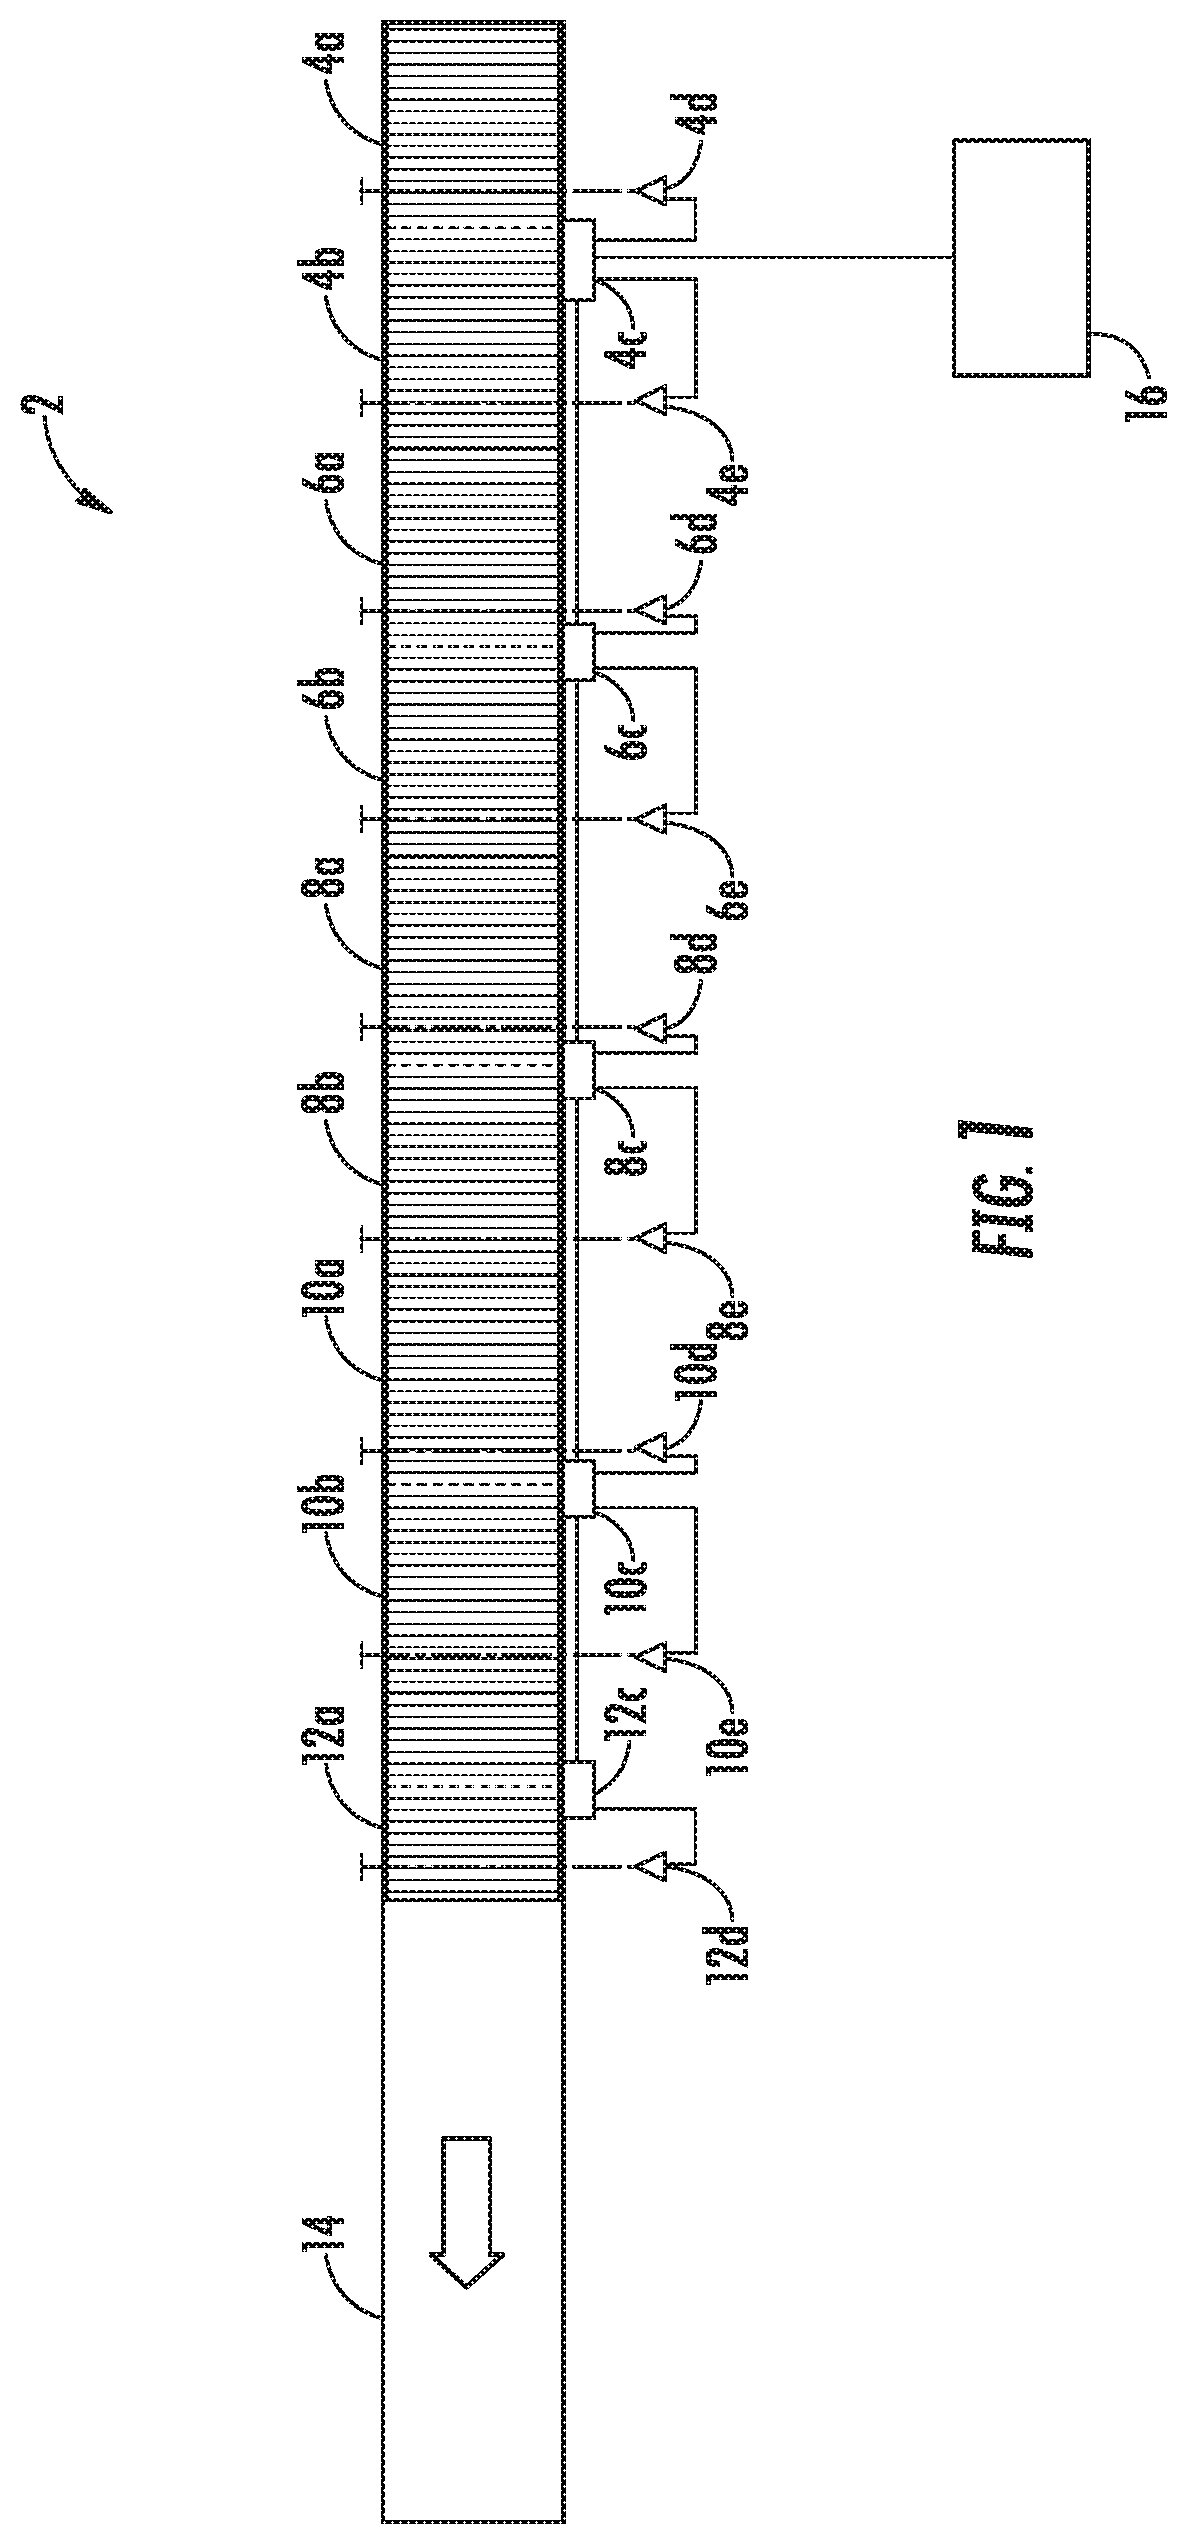 High-rate at high-density tunable accumulation conveyor